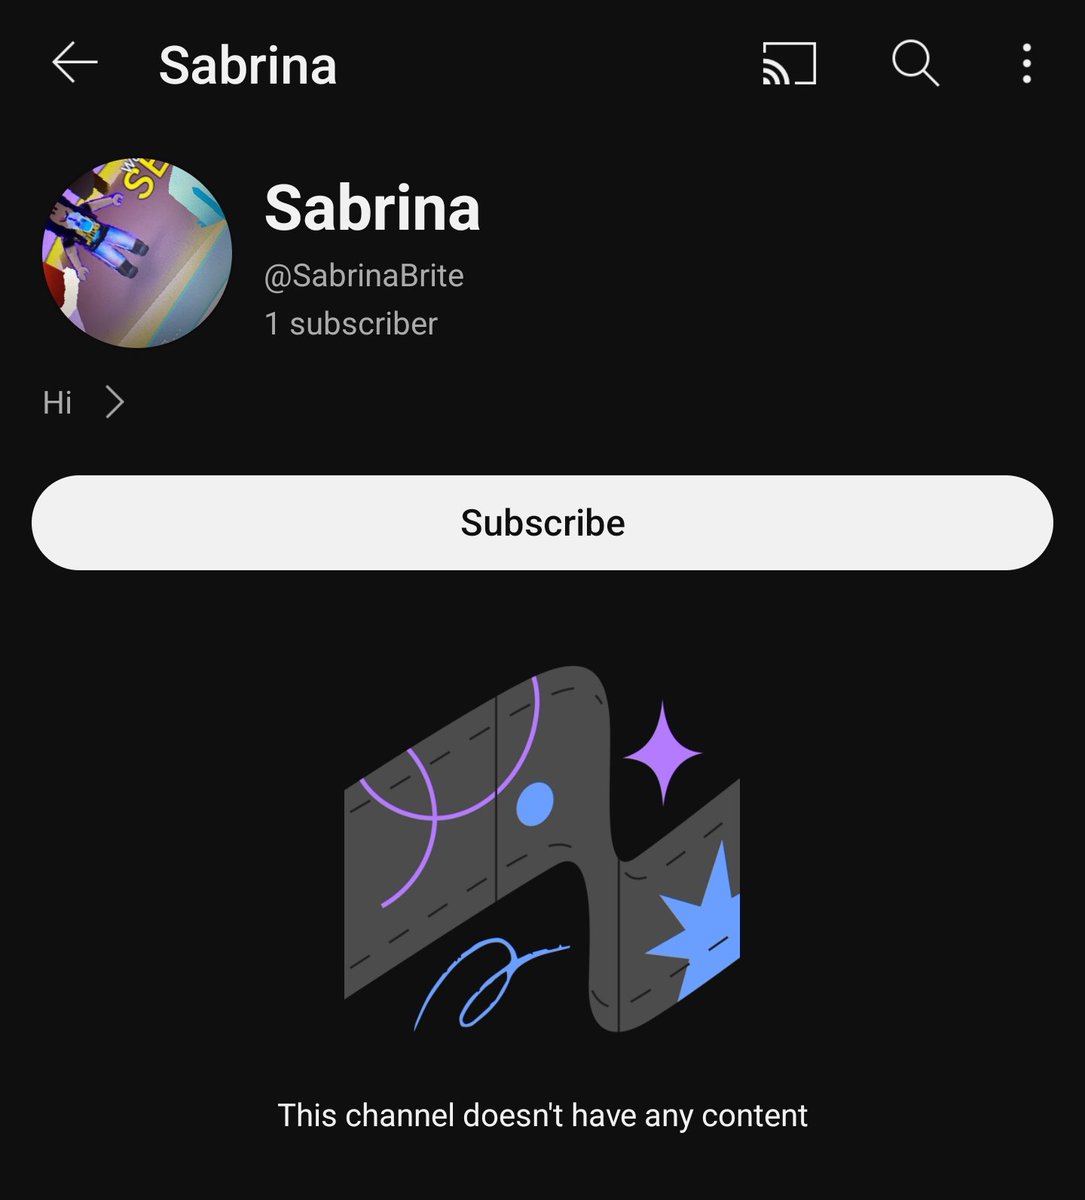 We need your help! Does anyone know who owns this YouTube channel with the @SabrinaBrite handle? We need to contact them. Thanks! 💜💚